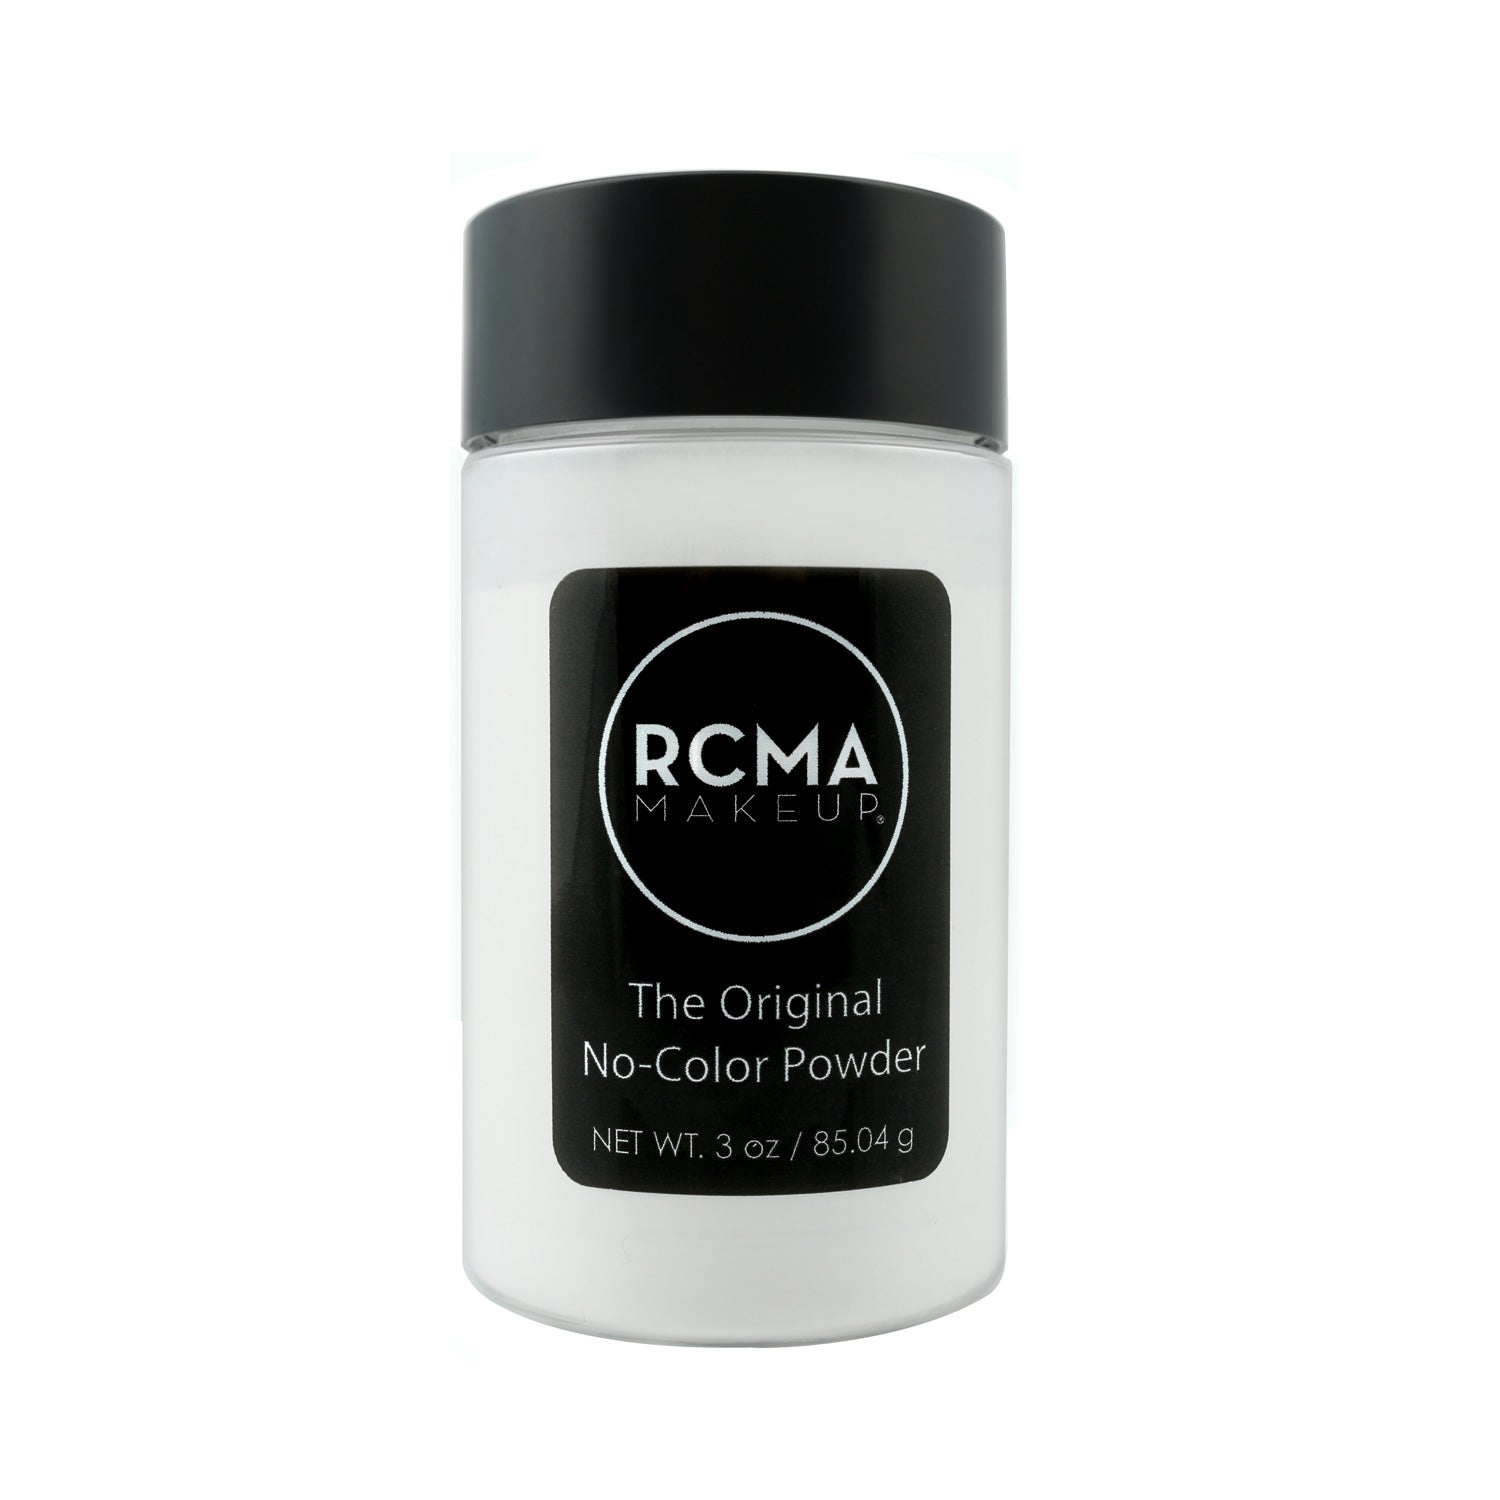 RCMA Make-Up - Hi everyone, we posted this a few months ago but I